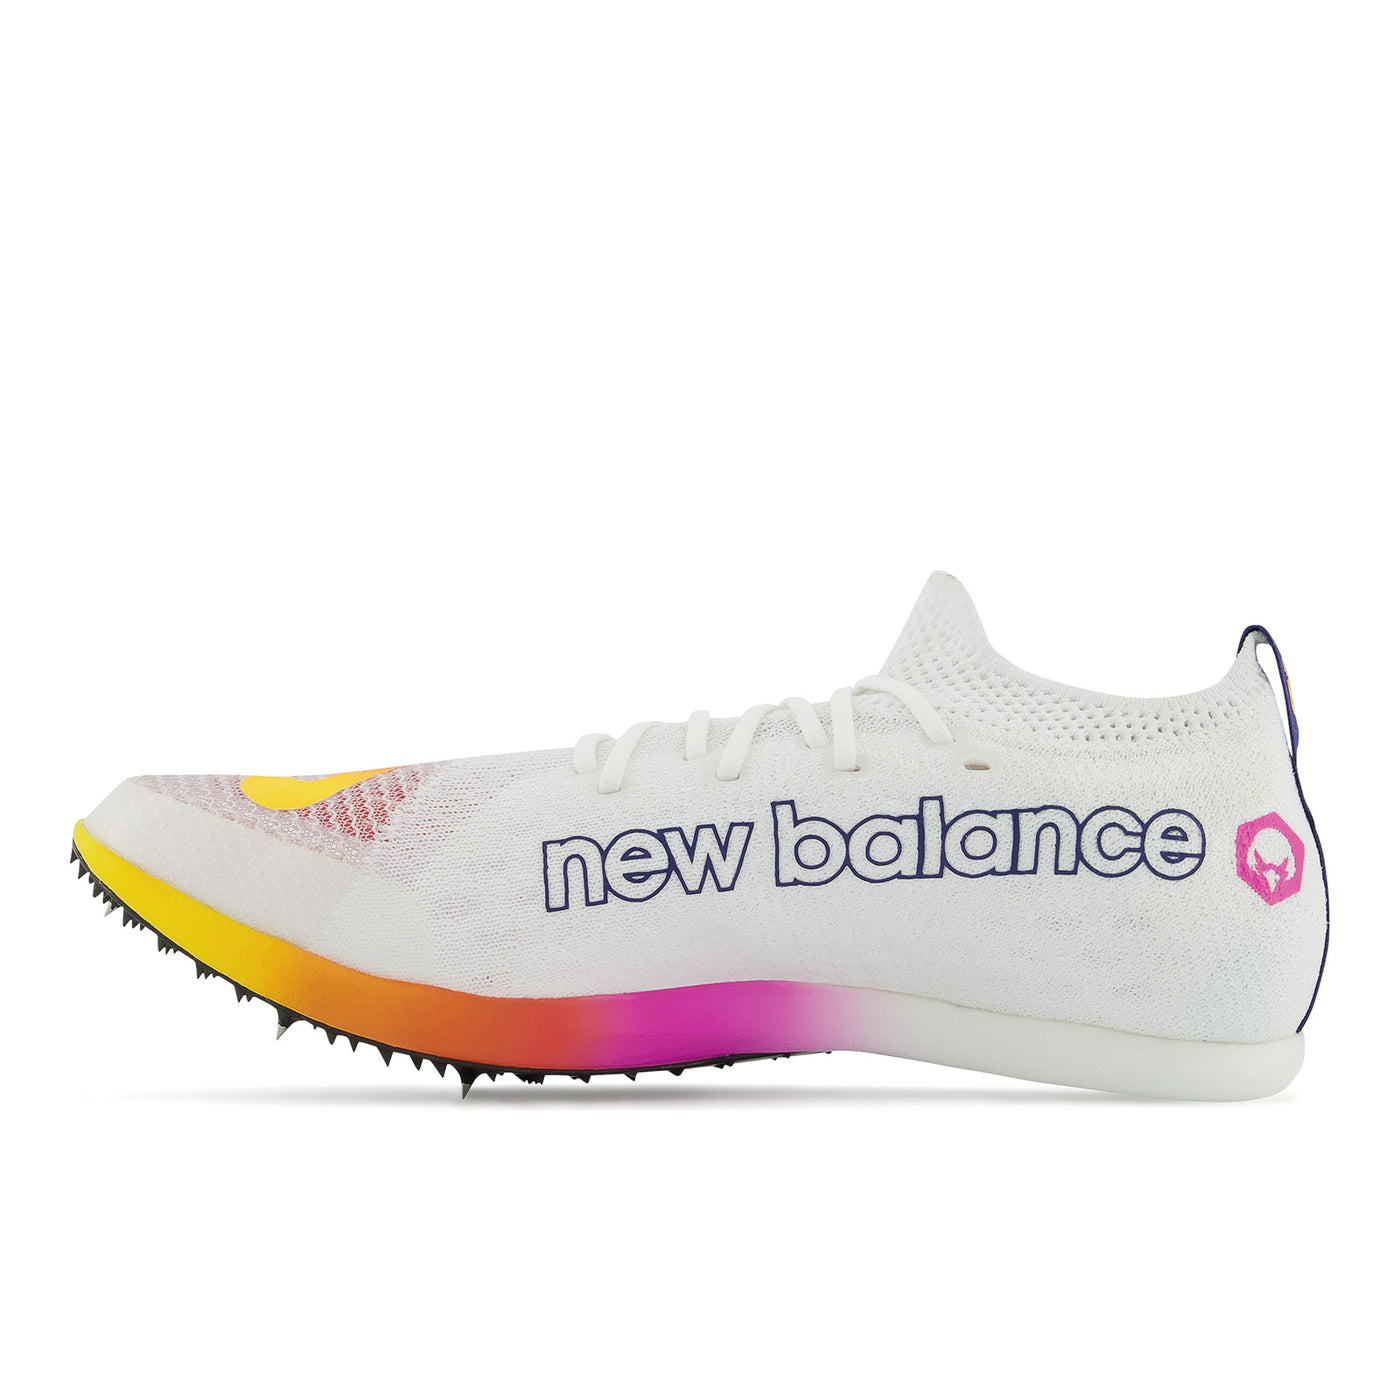 New Balance FuelCell MD-X Middle Distance Spike